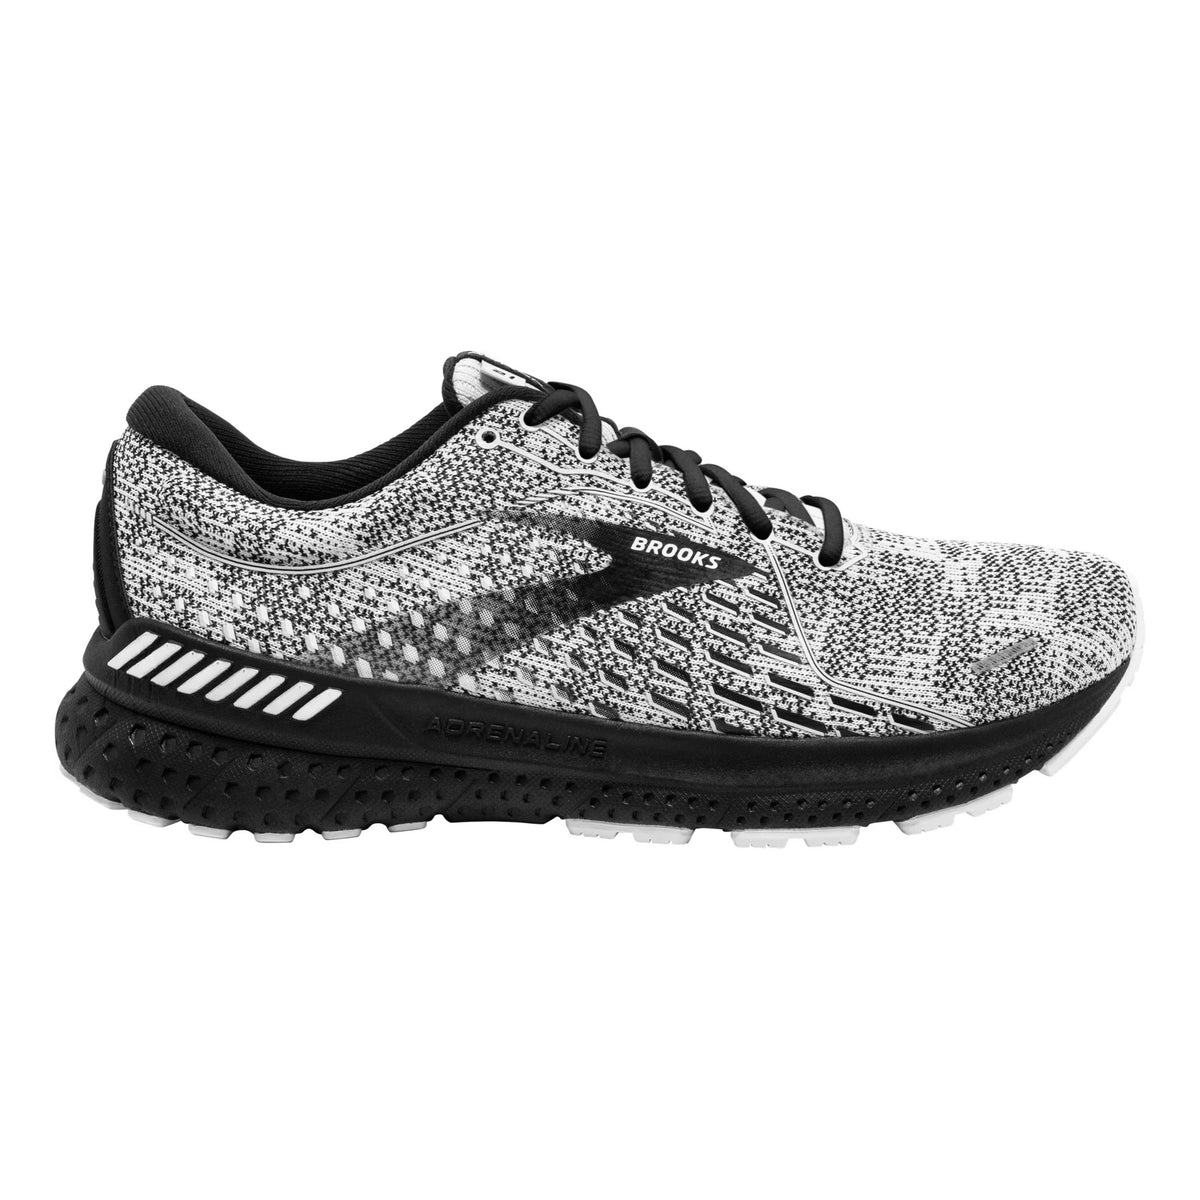 Sentence with replaced product: Black and white men&#39;s Brooks Adrenaline GTS 21 running shoe with GuideRails® Holistic Support System.